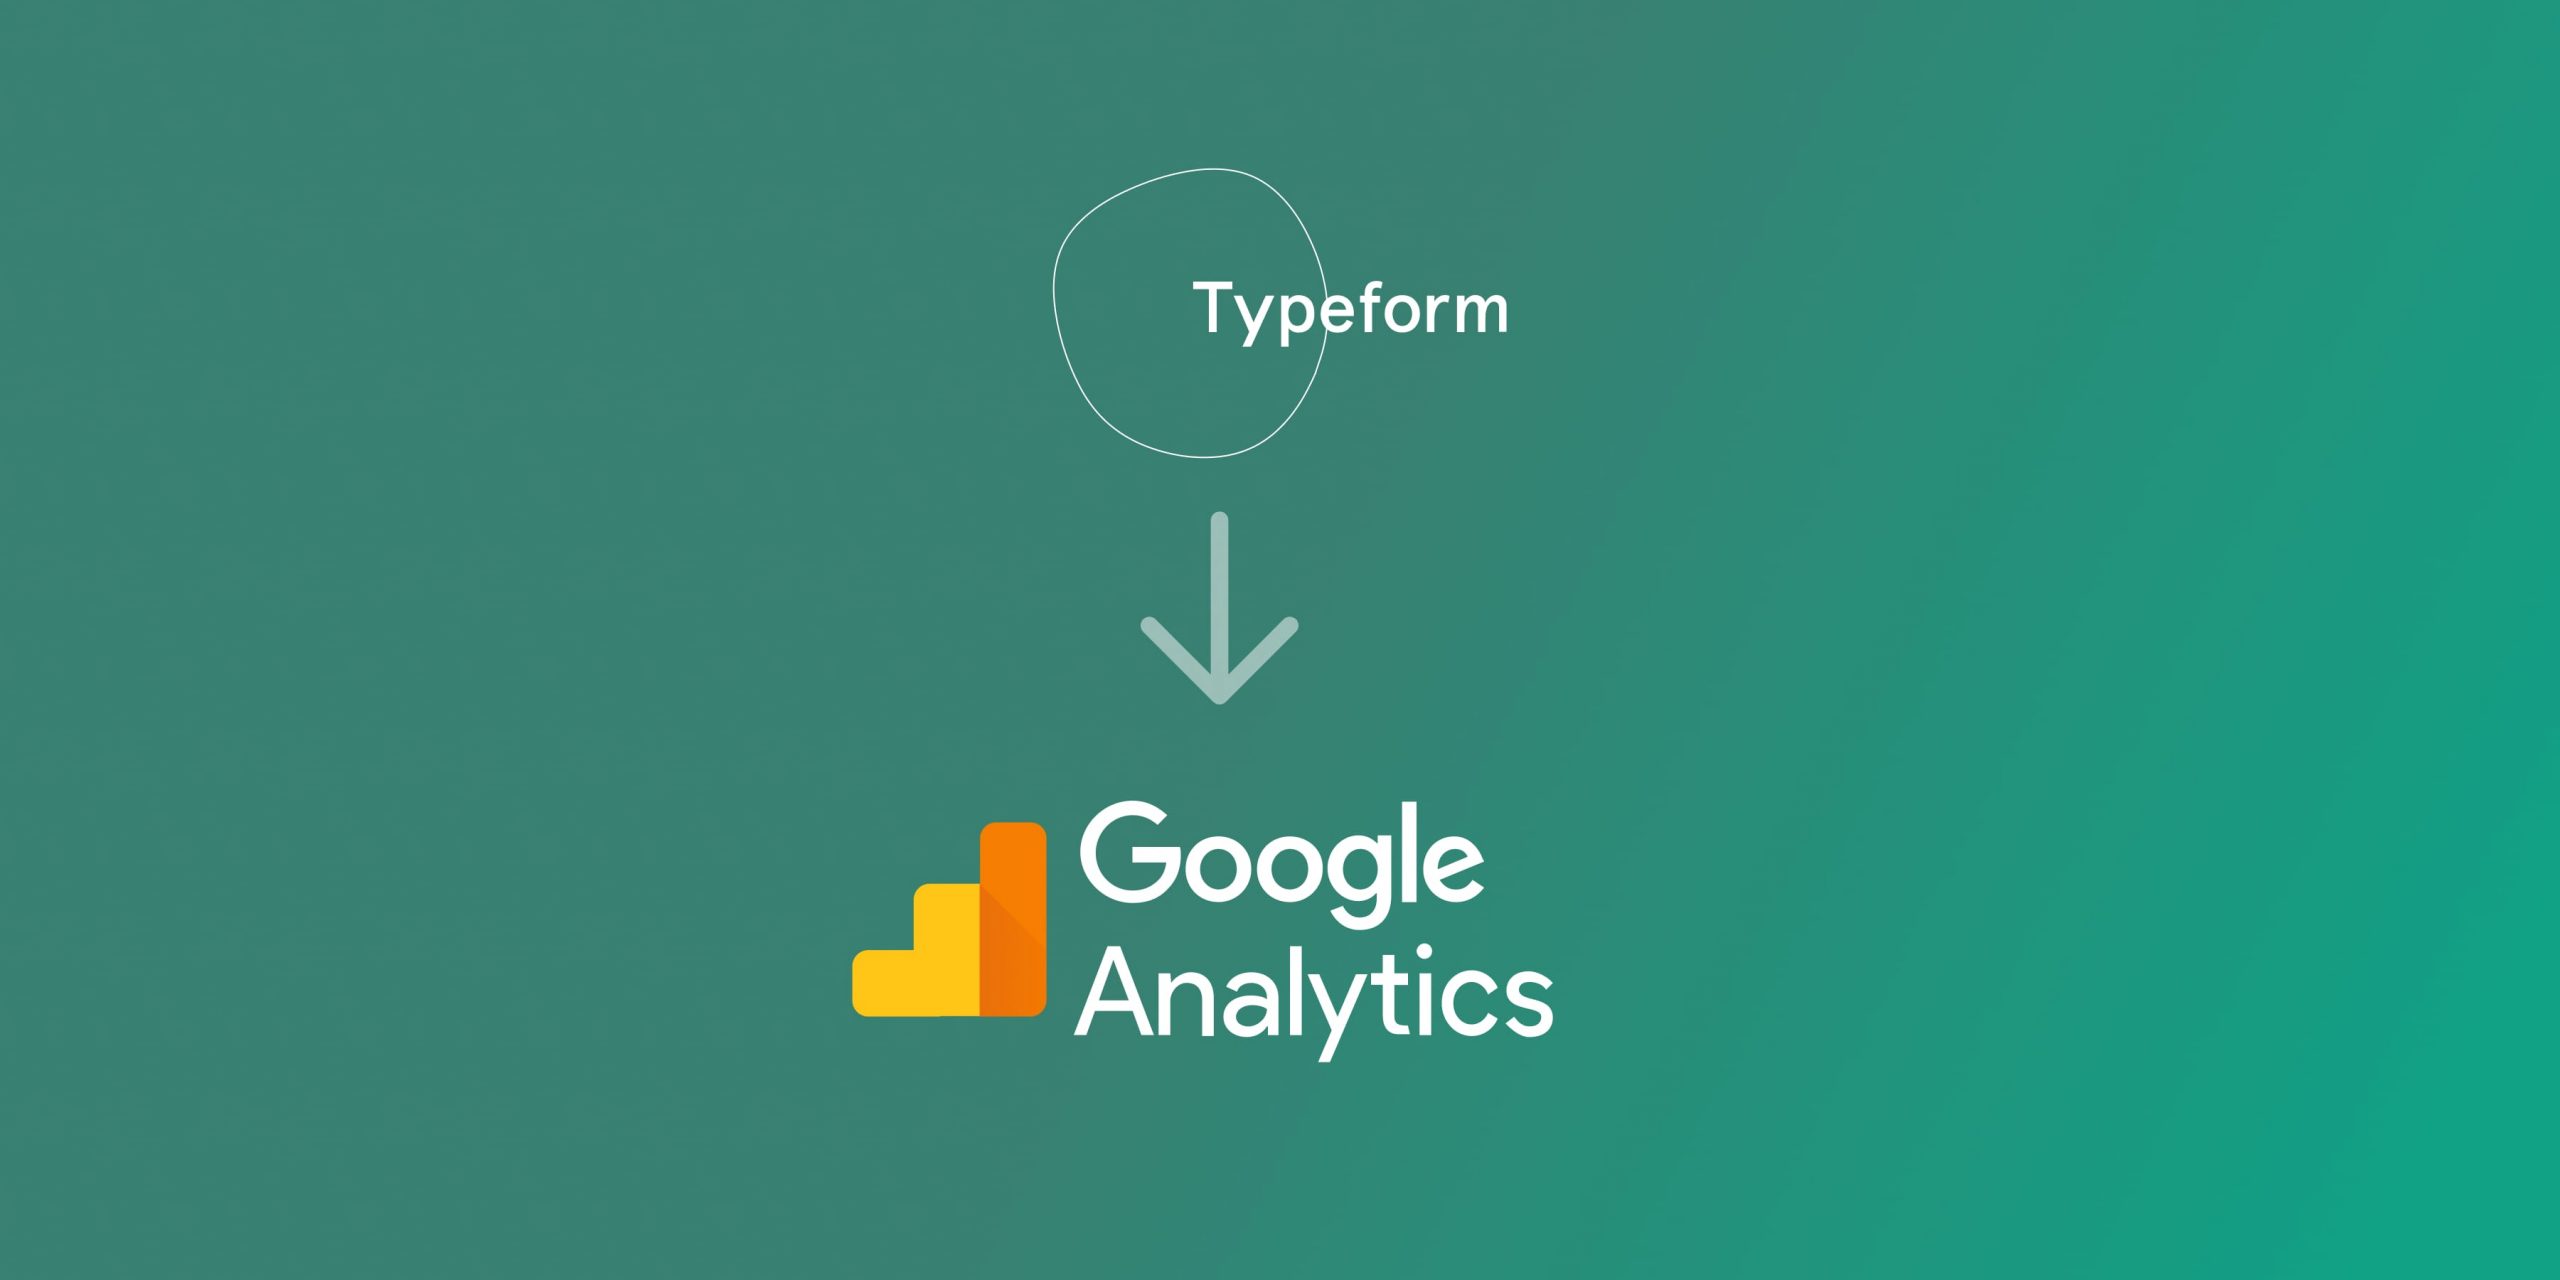 How to add Google Analytics to TypeForm – Without a Paid Plan for Free